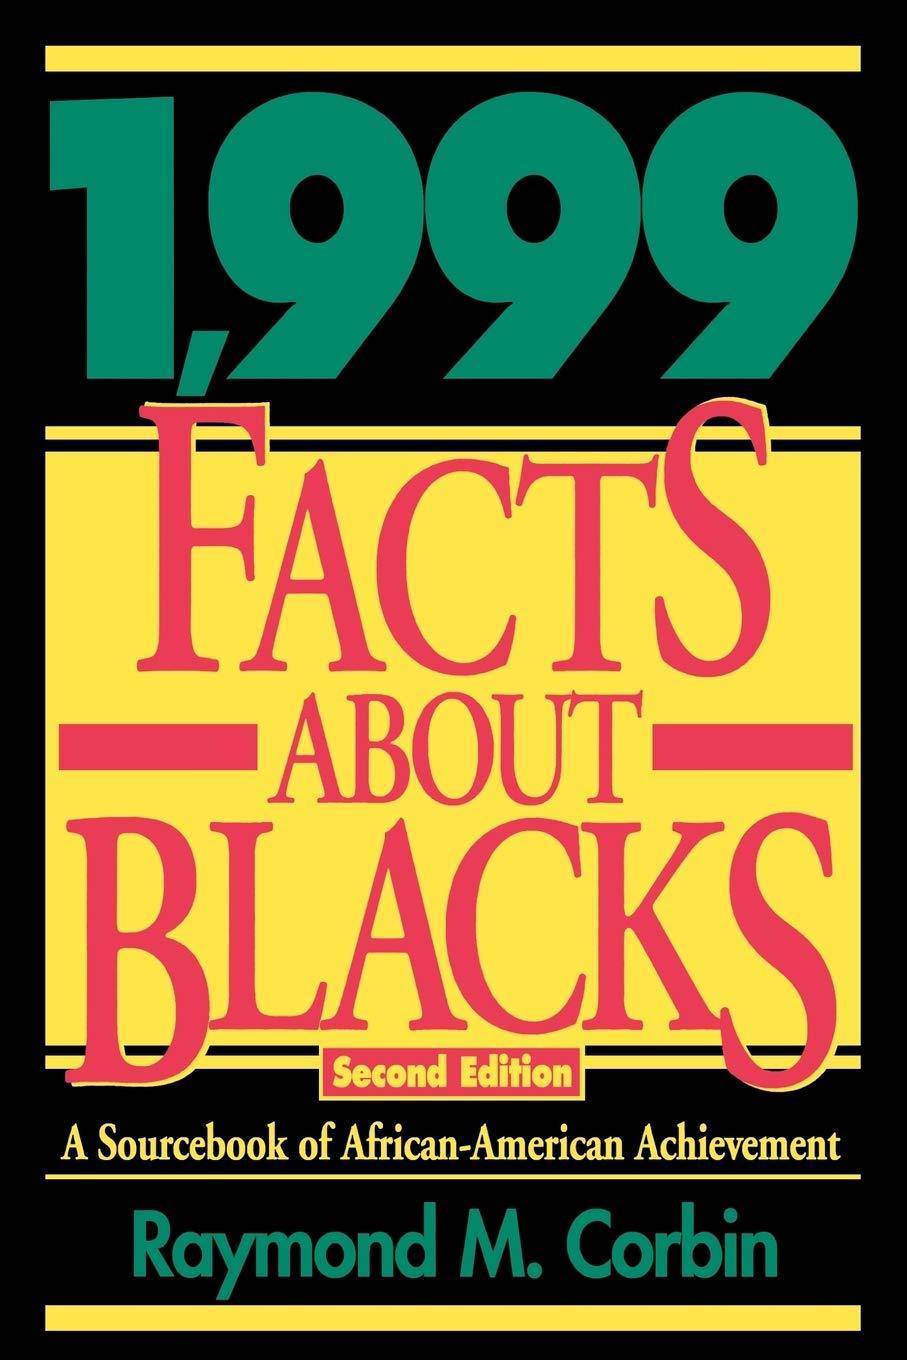 1,999 Facts About Blacks: A Sourcebook of African-American Achie